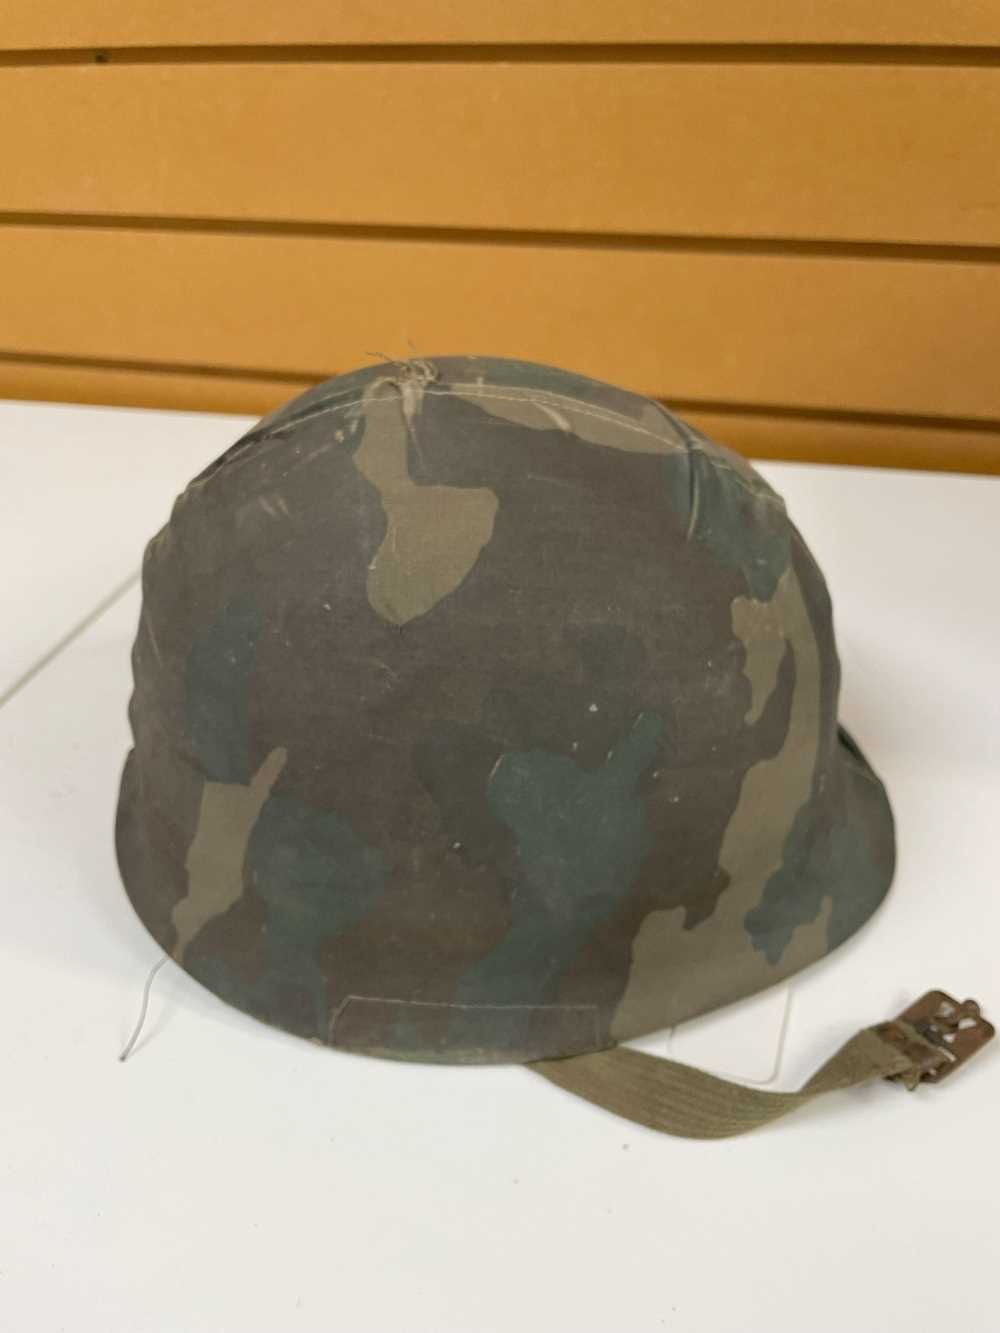 THE MILITARY CLUB HOUSE: A 1982 ARGENTINE INFANTRY HELMET FROM THE FALKLANDS CONFLICT with - Image 3 of 10